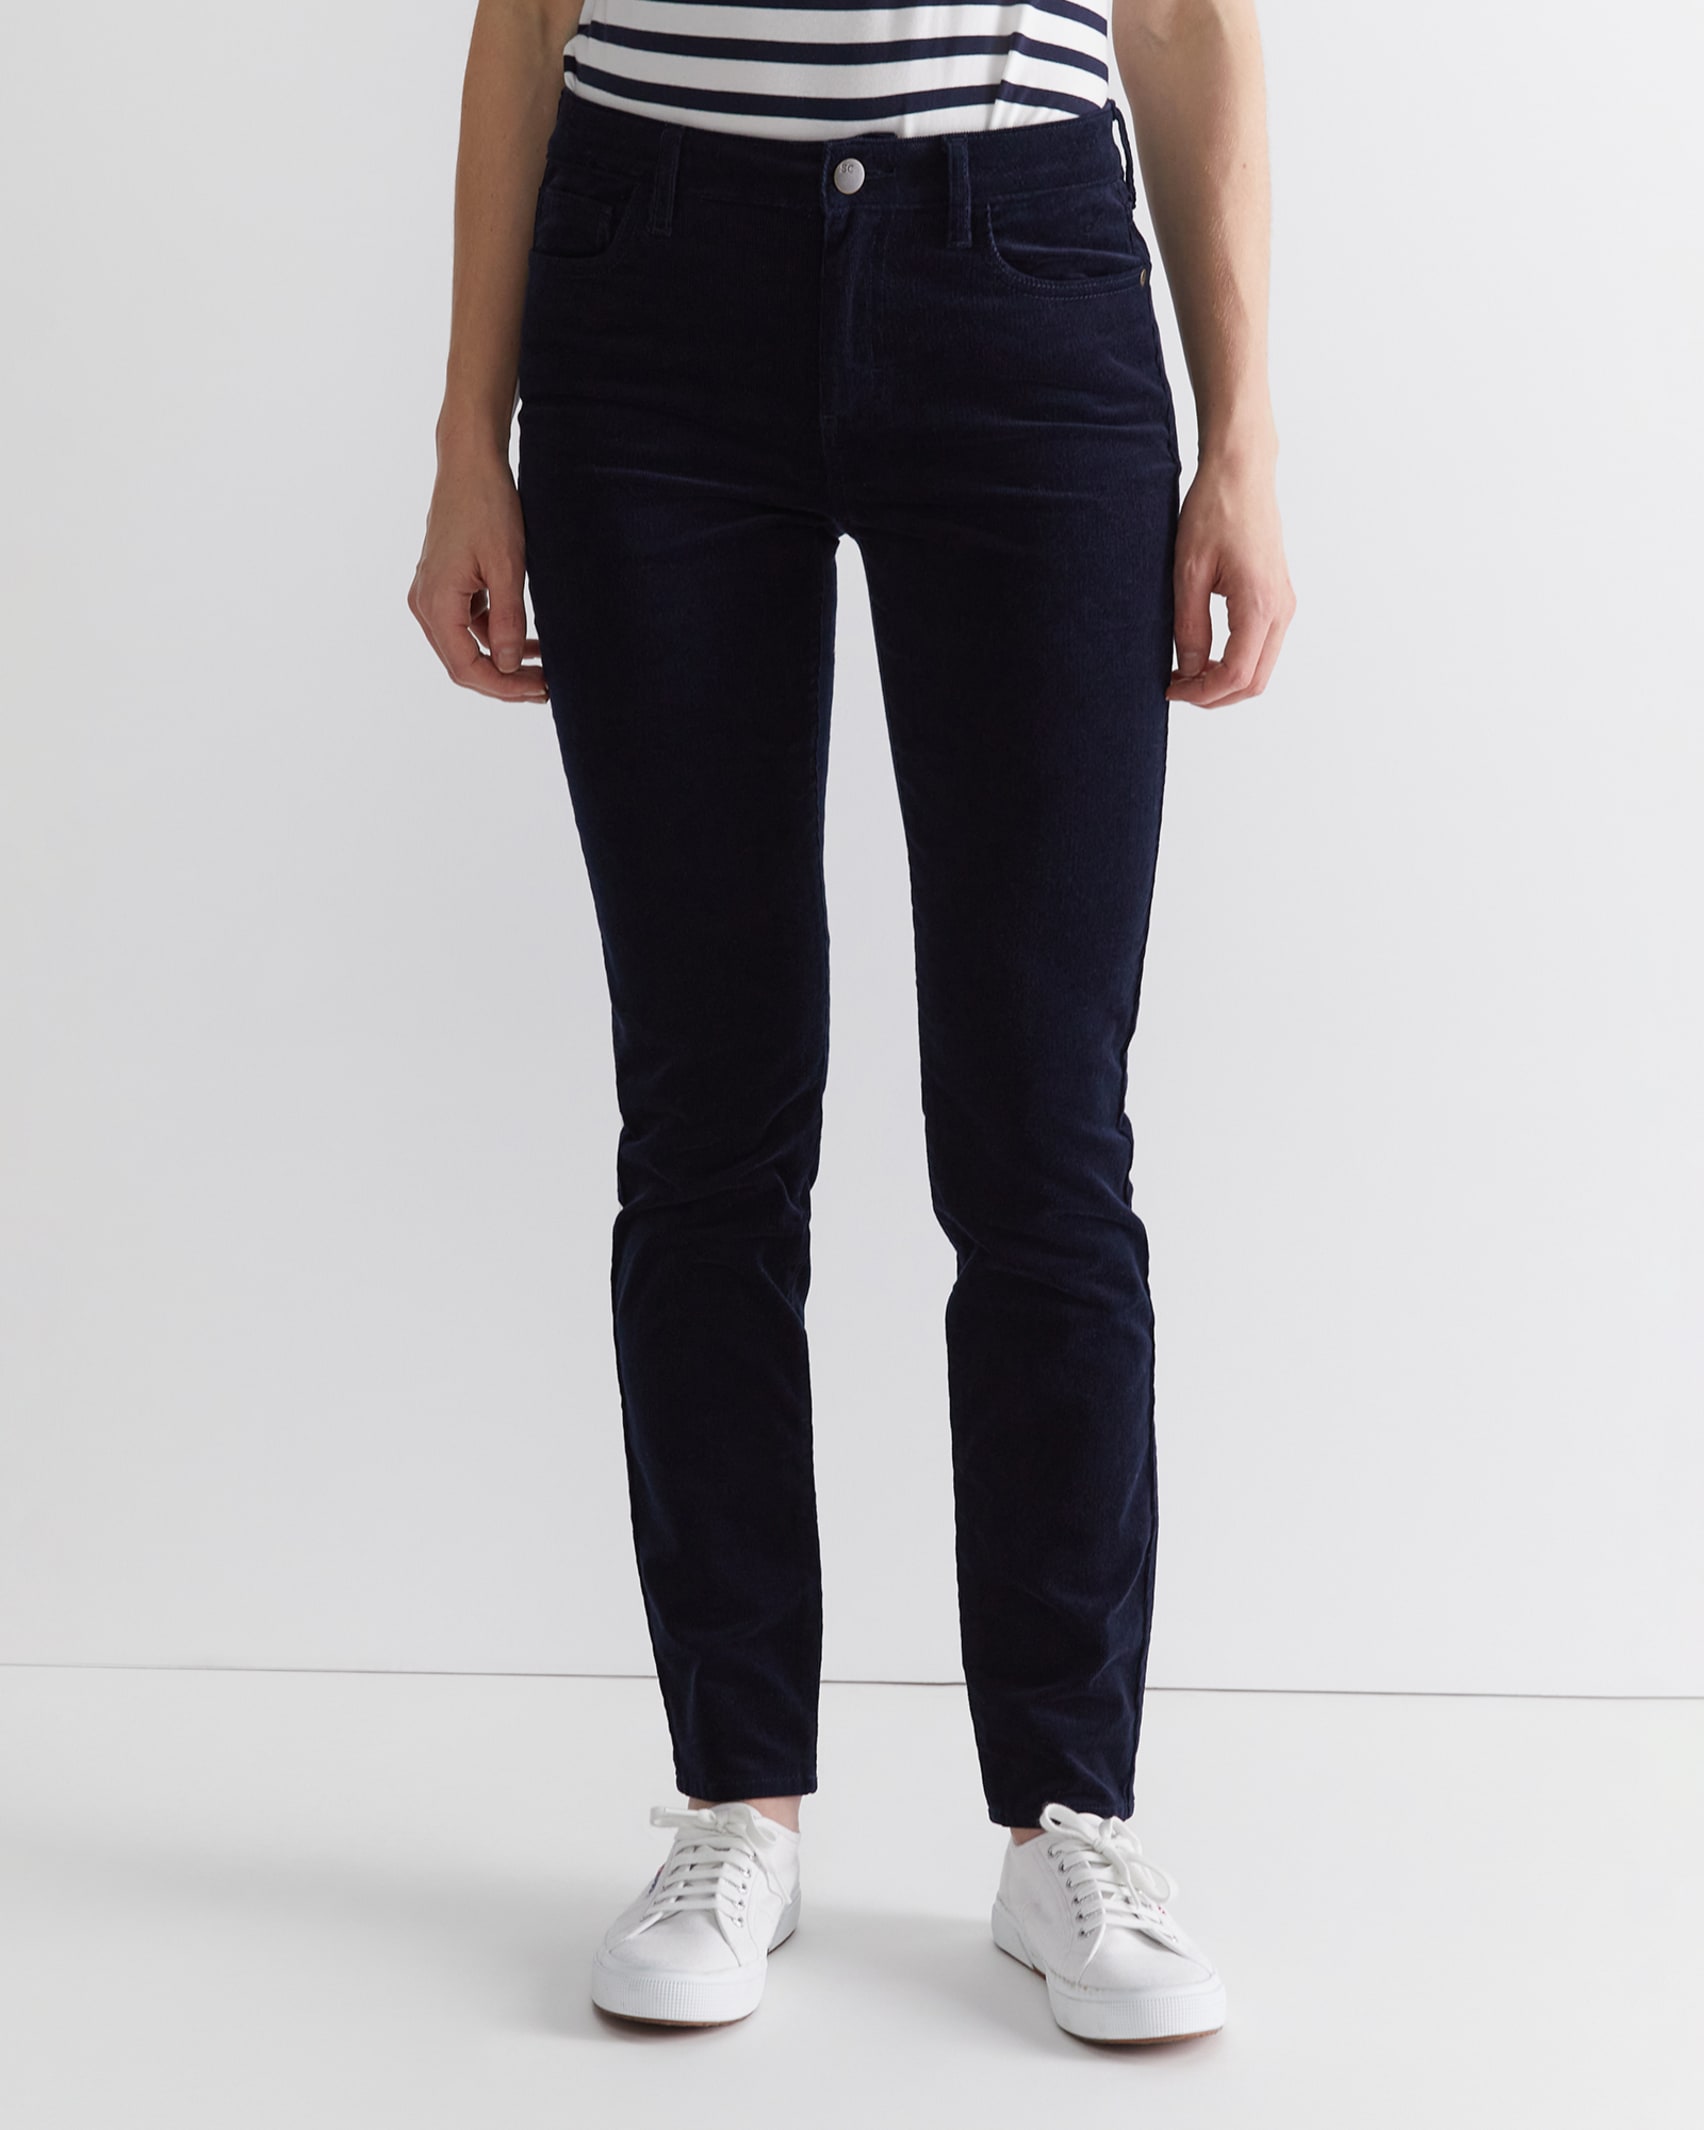 Cleo Cord Jean in NAVY